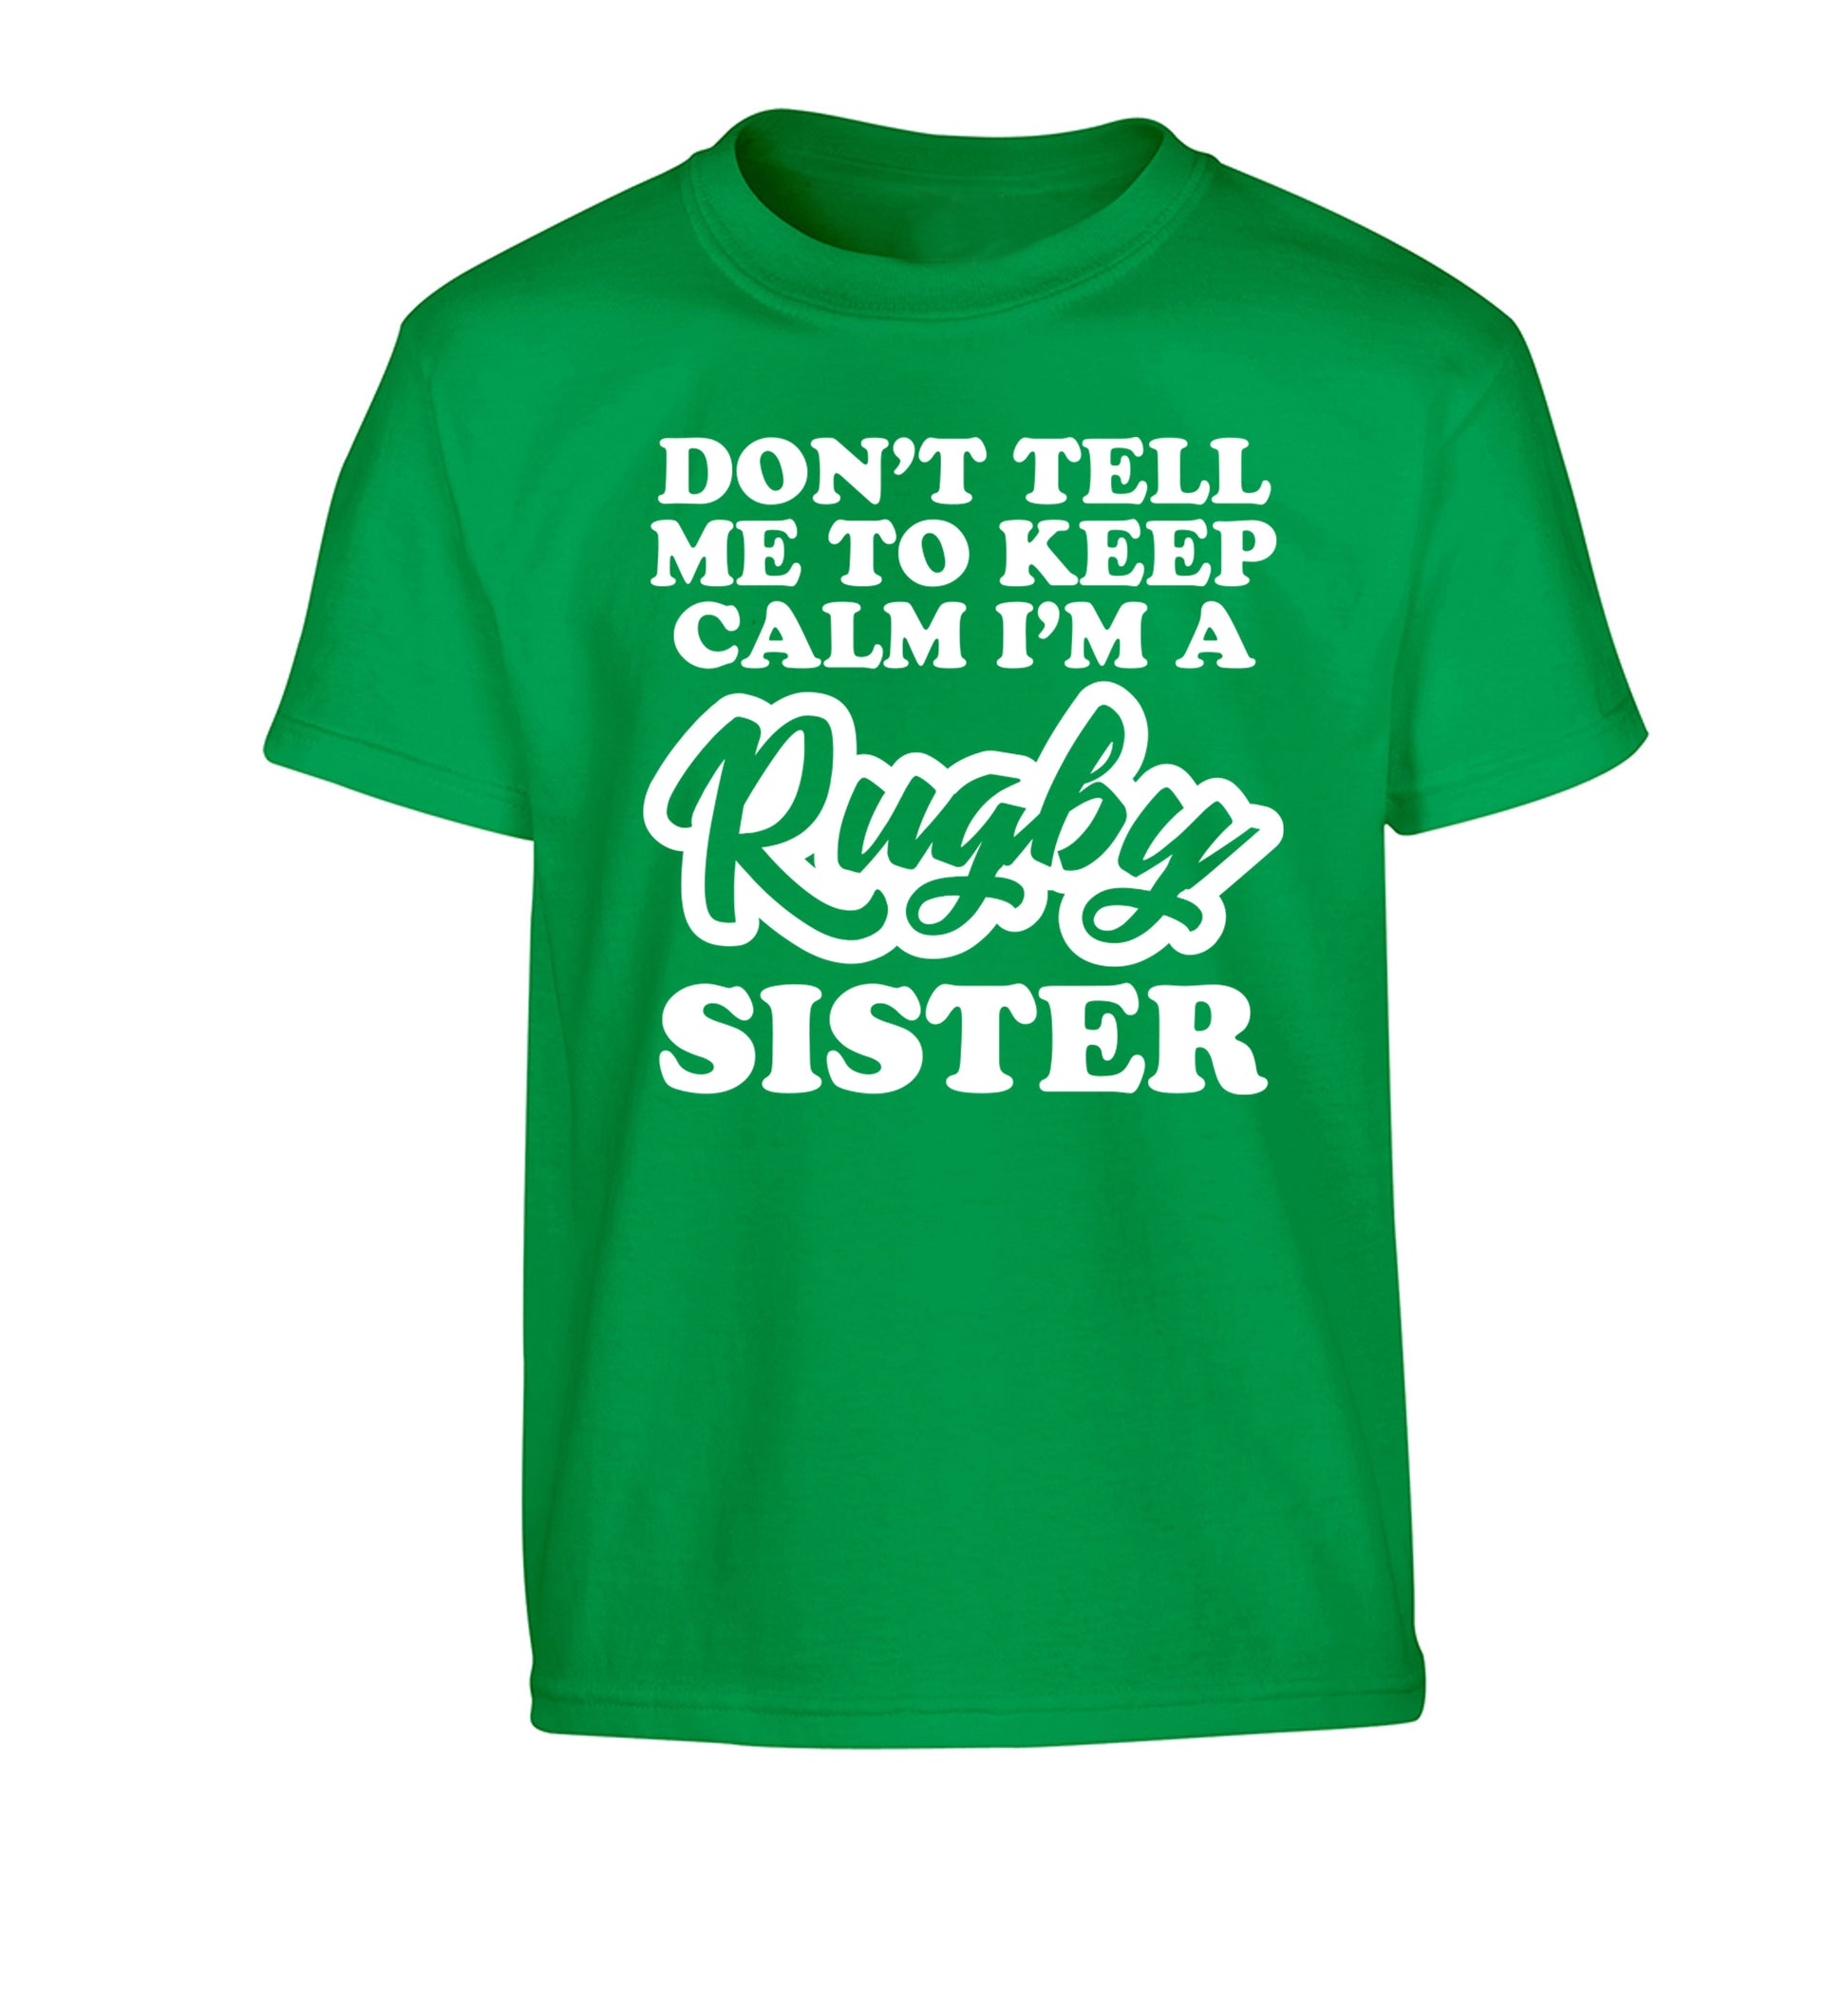 Don't tell me keep calm I'm a rugby sister Children's green Tshirt 12-13 Years